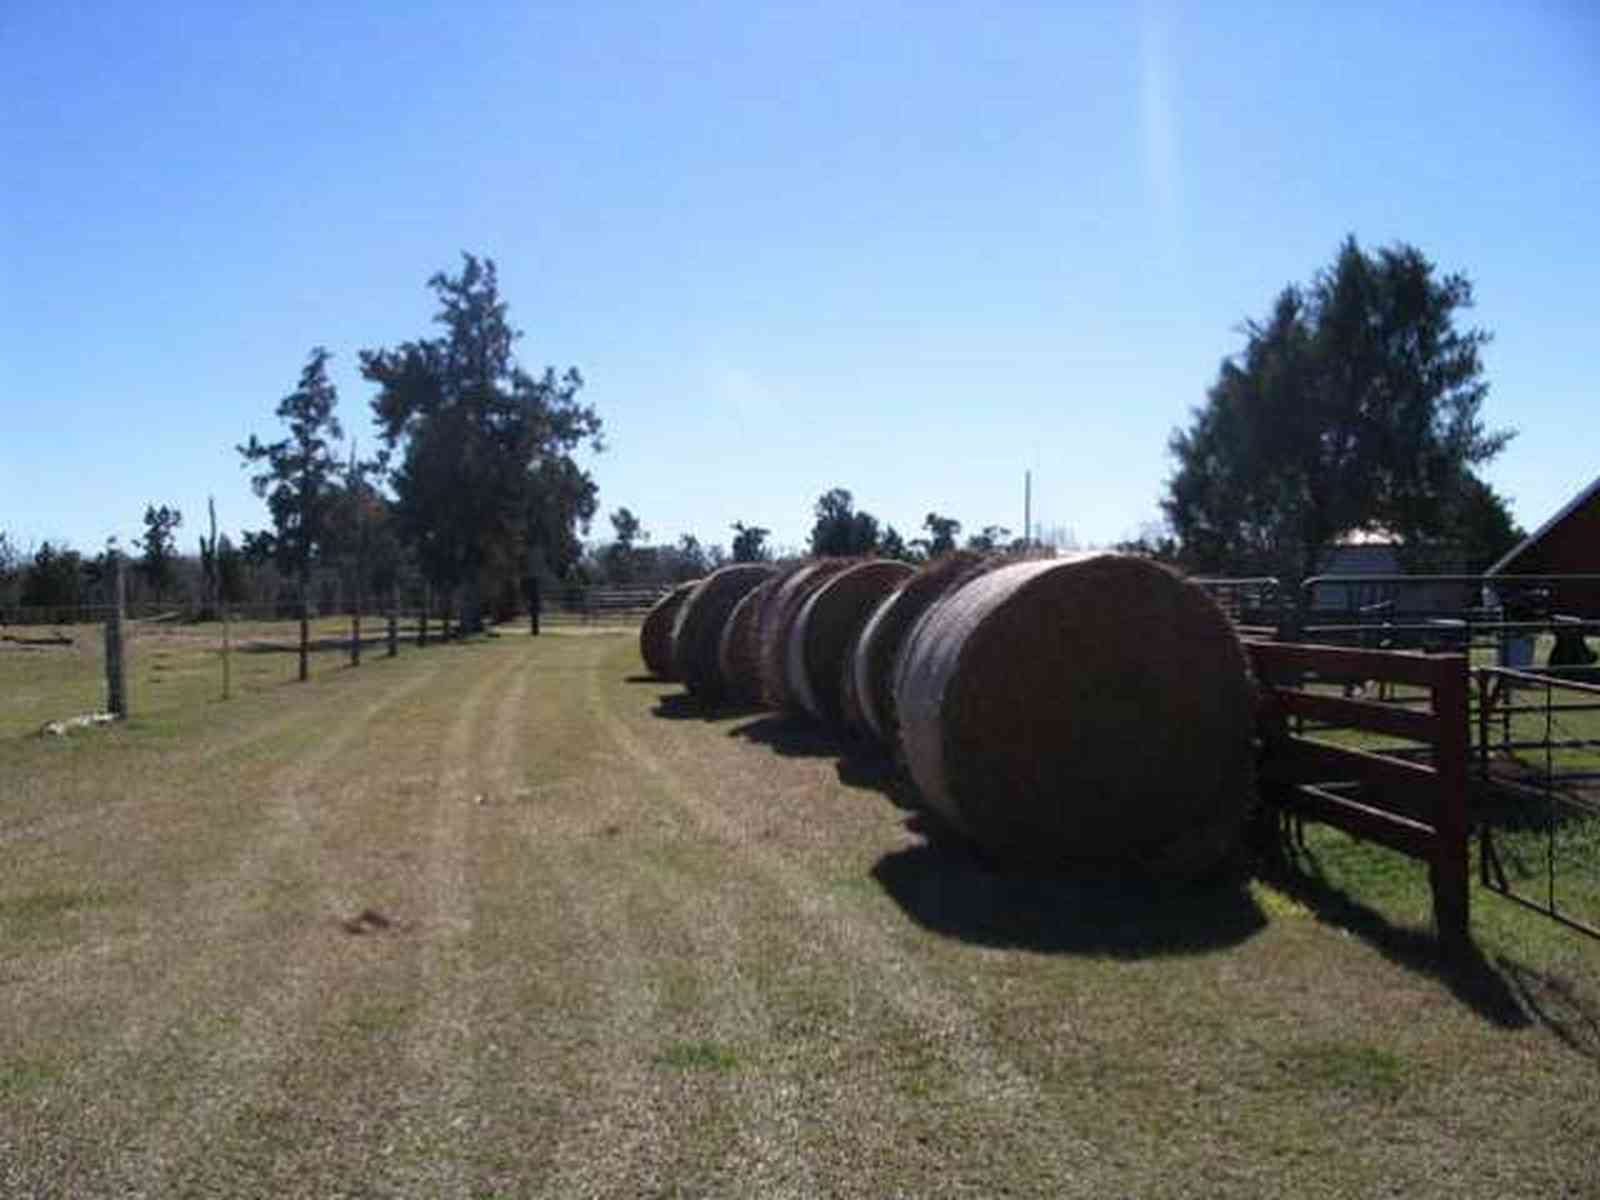 Leaning-Post-Ranch_02.jpg:  pine trees, hay bales, ranch, 